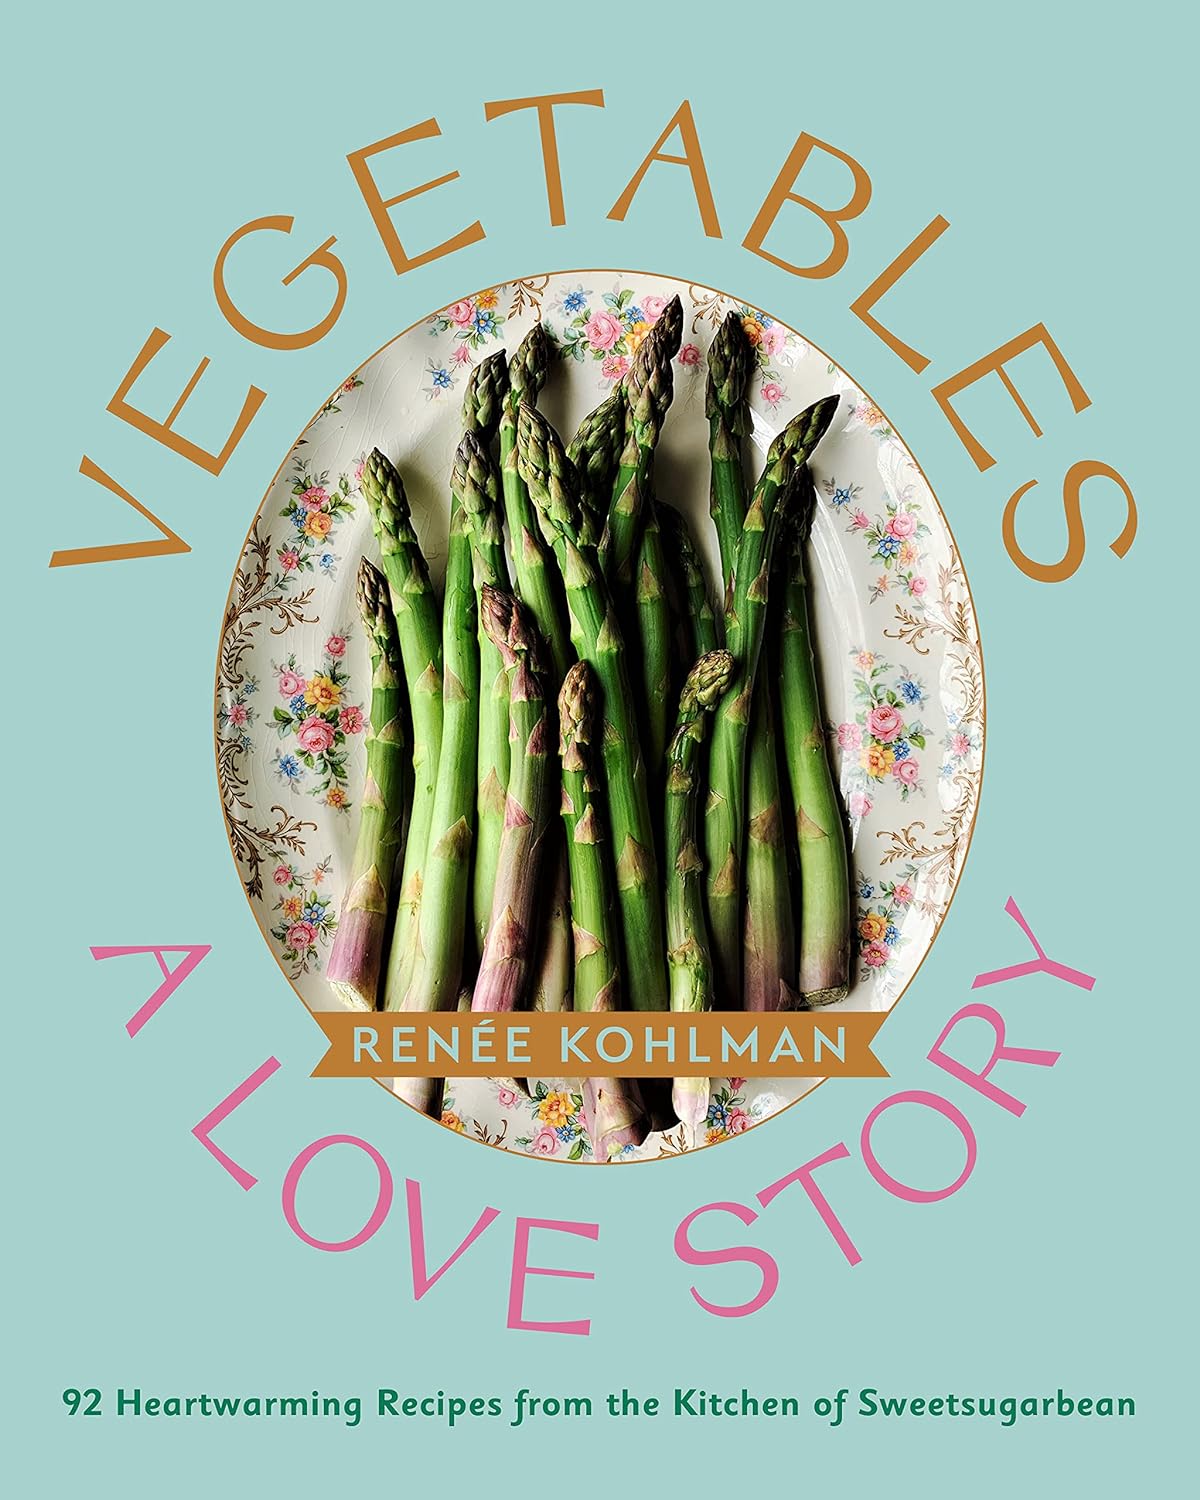 See Vegetables a Love Story in Library Catalog